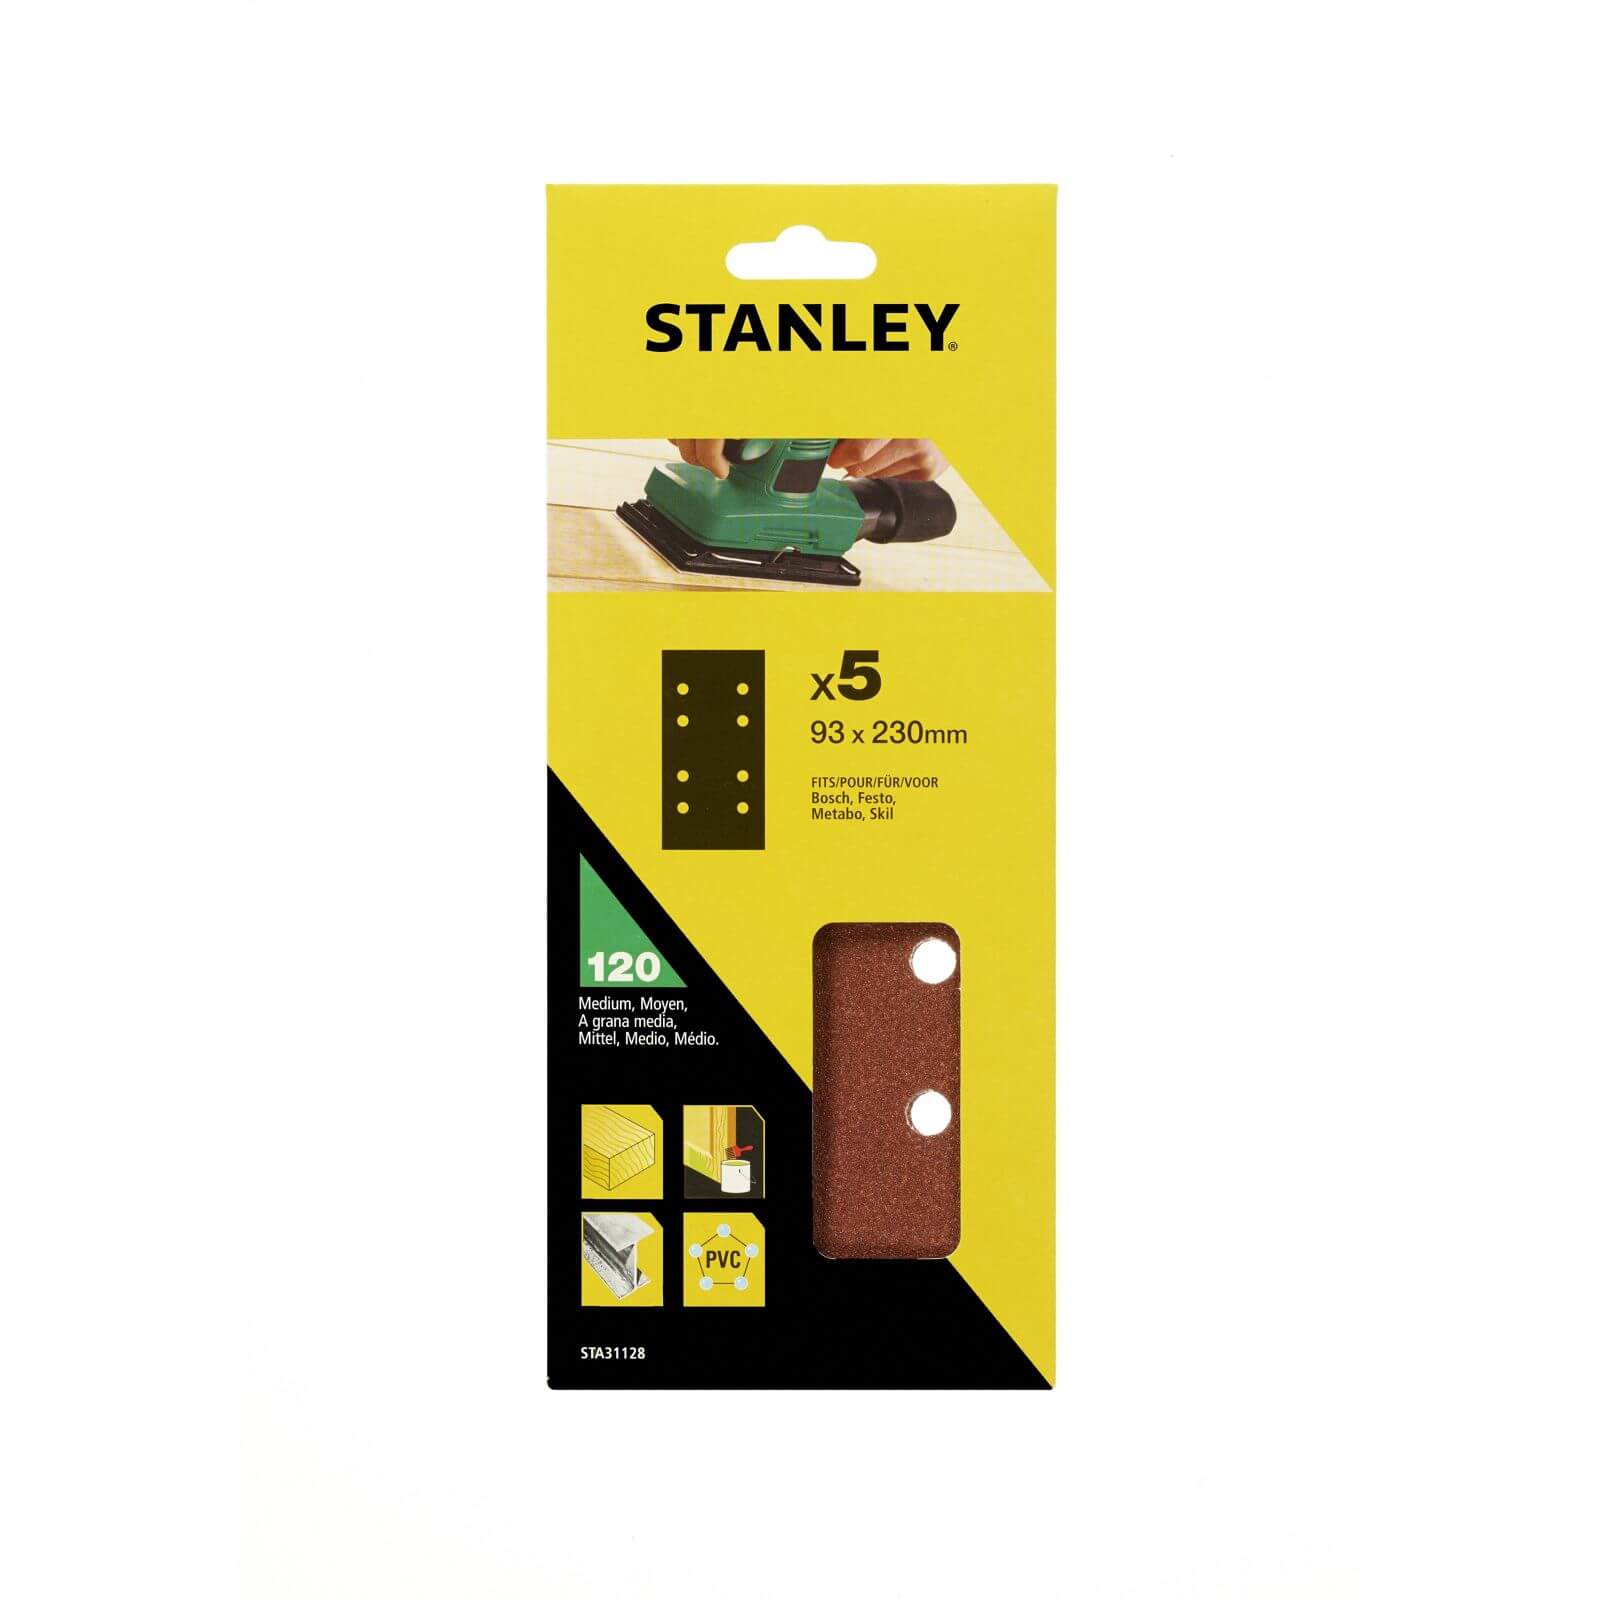 Photo of Stanley 1/3 Sheet Sander Punched Wire Clip 120g Sanding Sheets